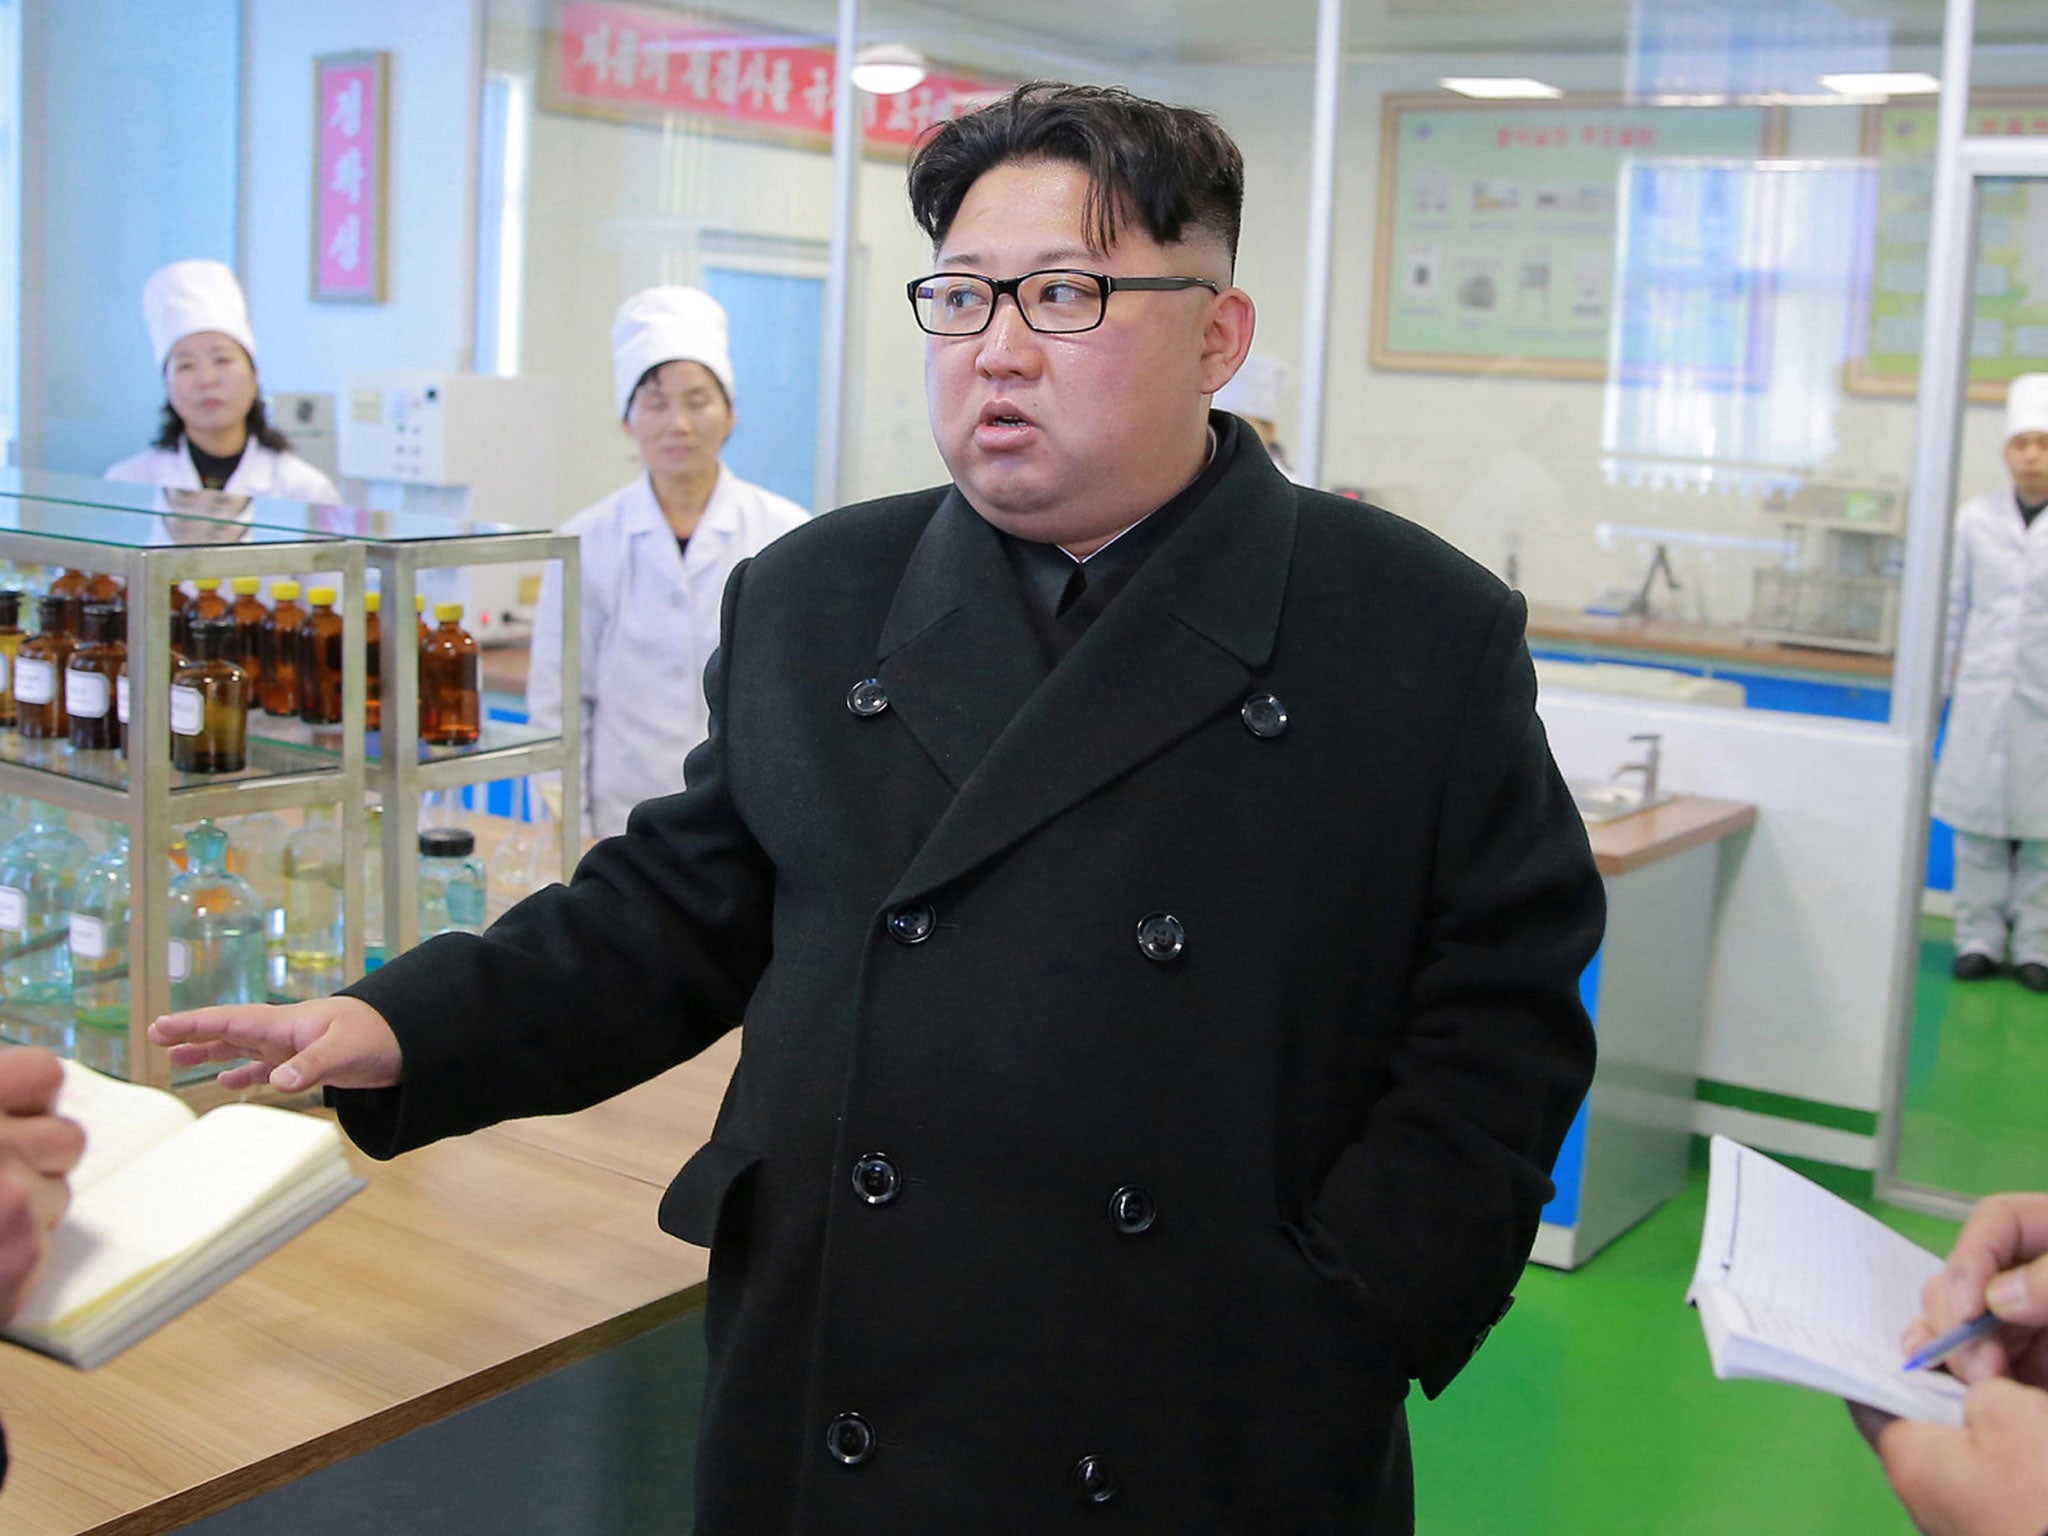 North Korean leader Kim Jong-un, who is not part of the delegation